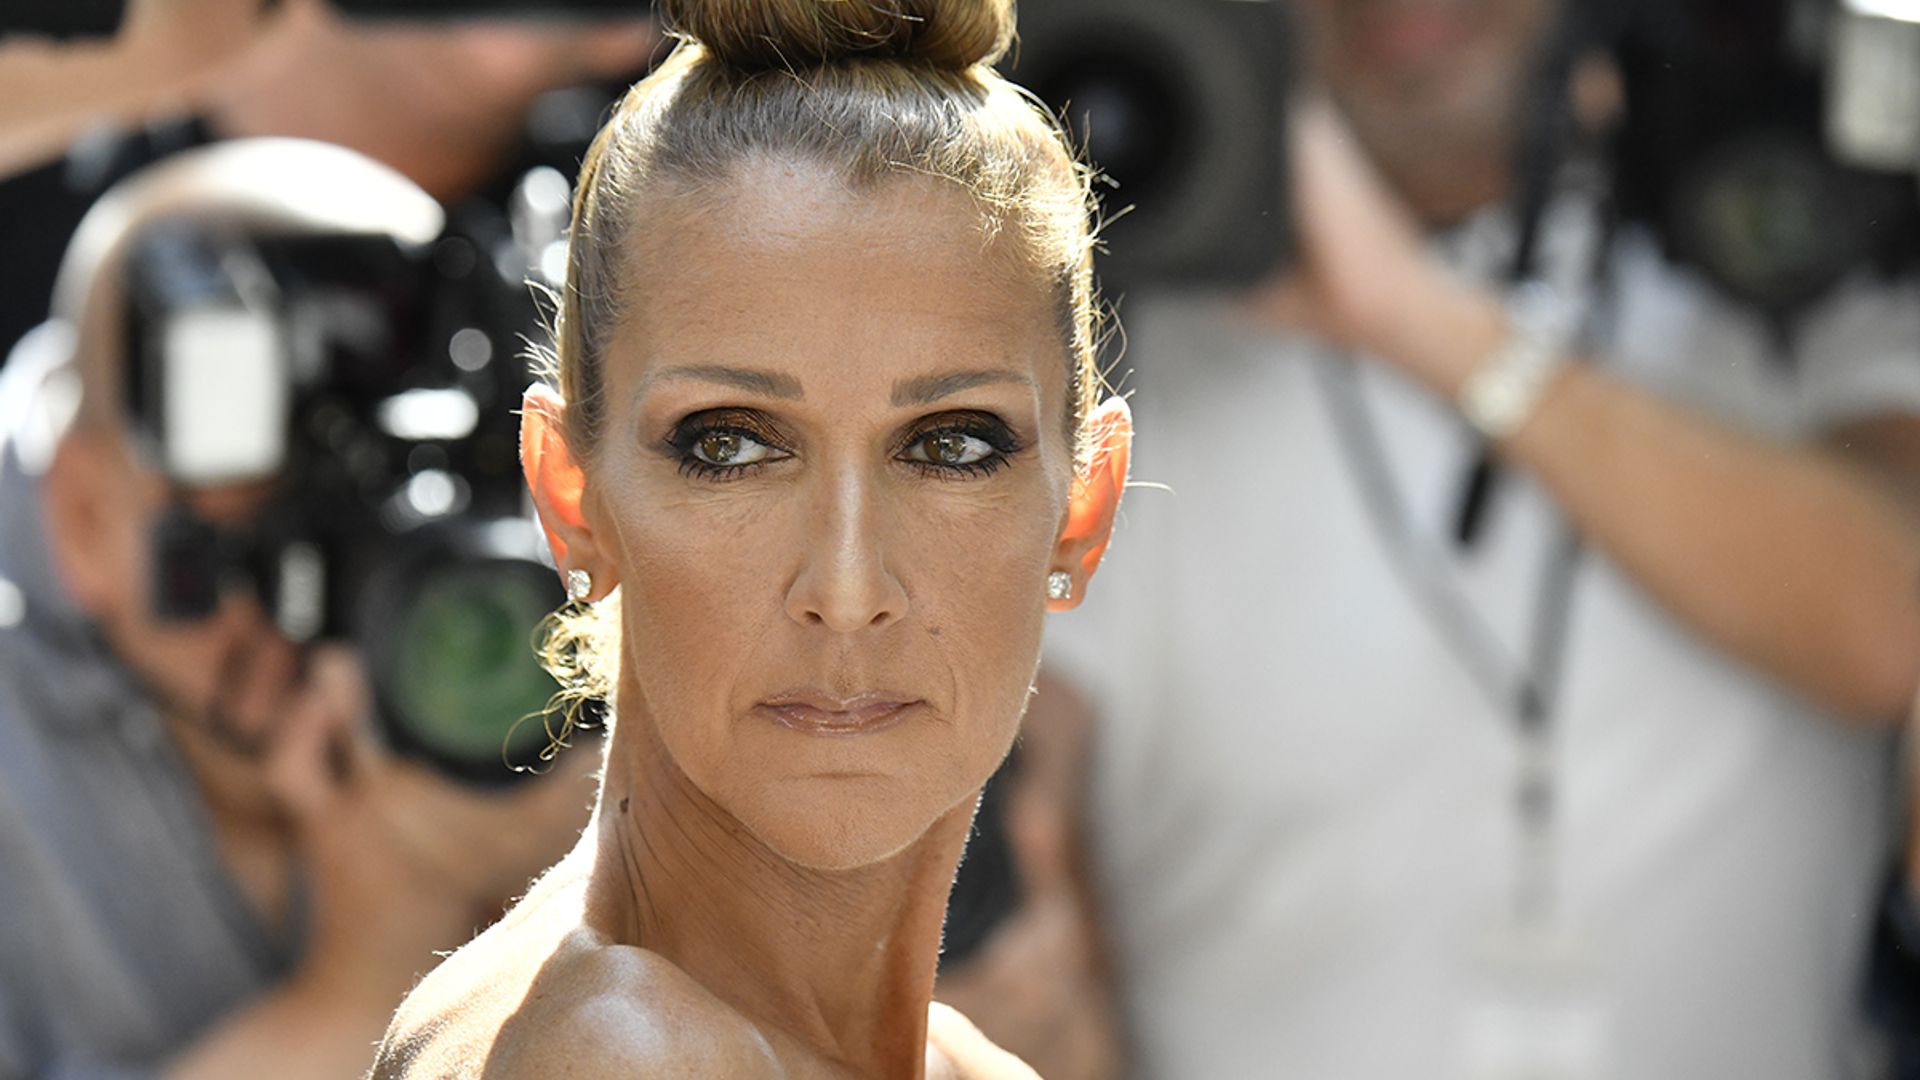 celine dion health issues